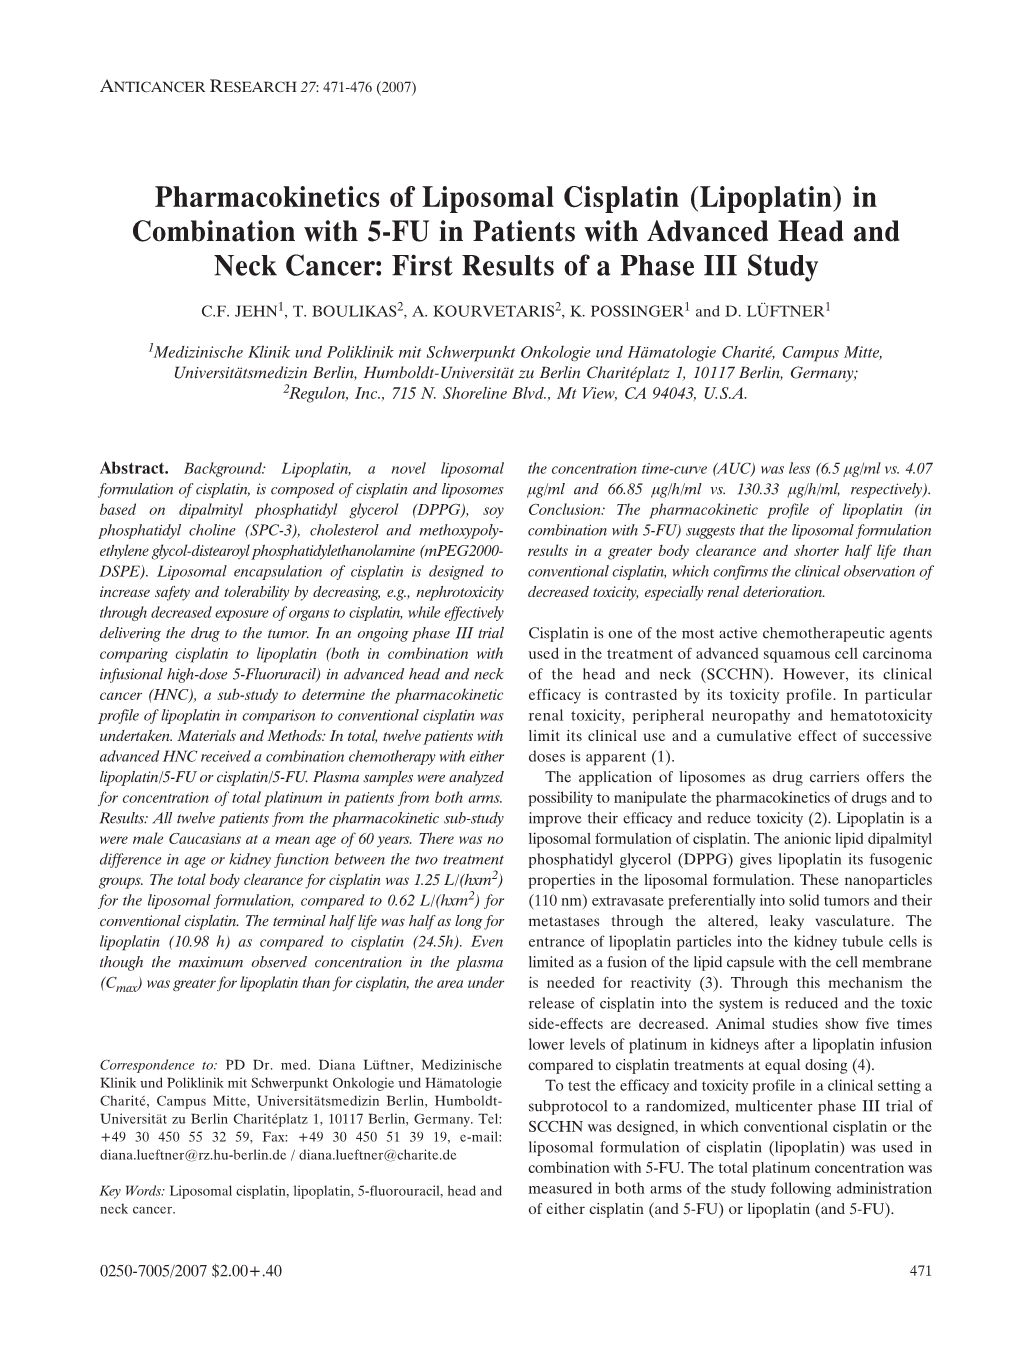 Pharmacokinetics of Liposomal Cisplatin (Lipoplatin) in Combination with 5-FU in Patients with Advanced Head and Neck Cancer: First Results of a Phase III Study